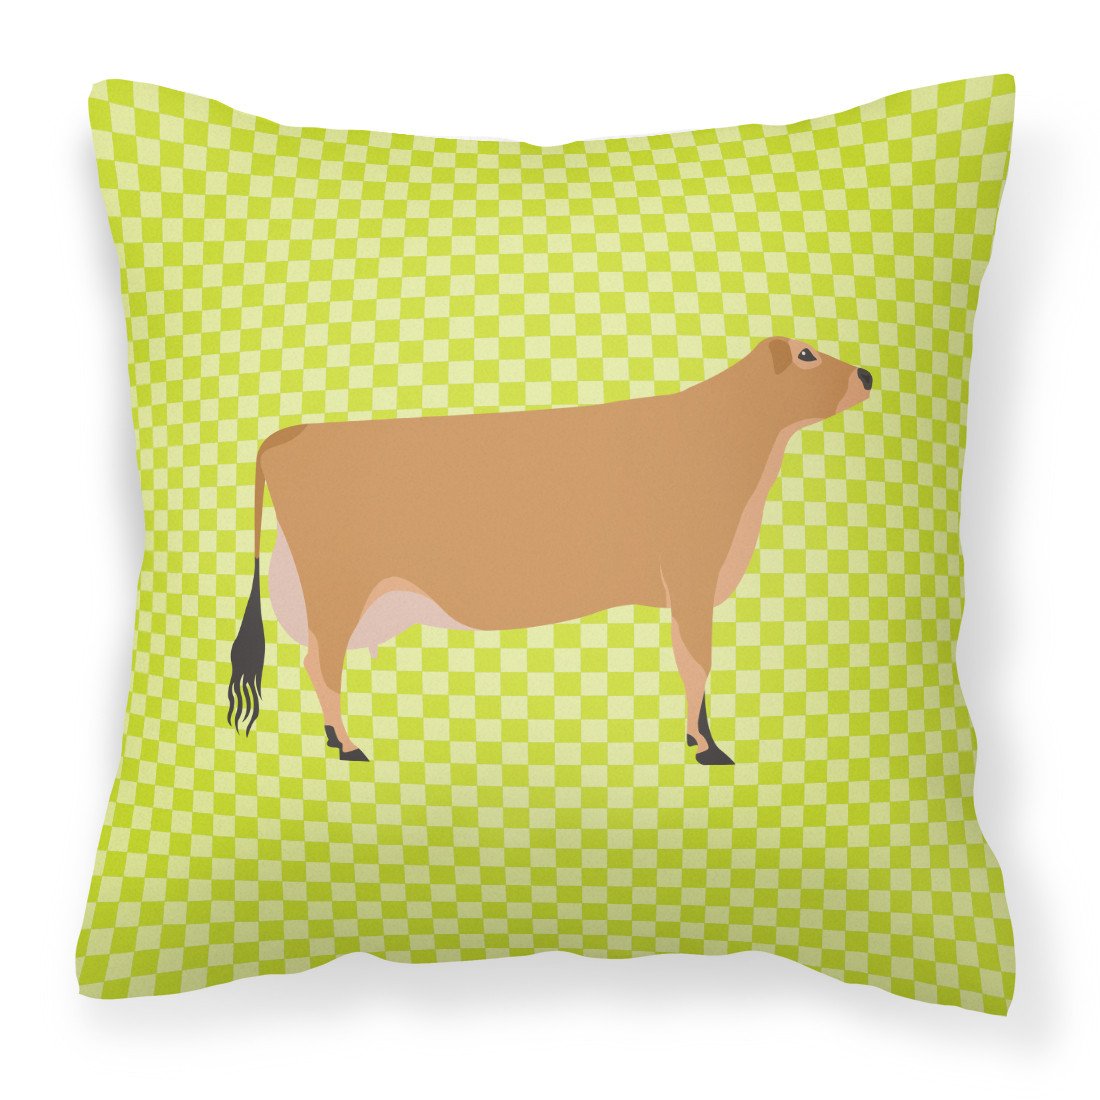 Jersey Cow Green Fabric Decorative Pillow BB7655PW1818 by Caroline's Treasures